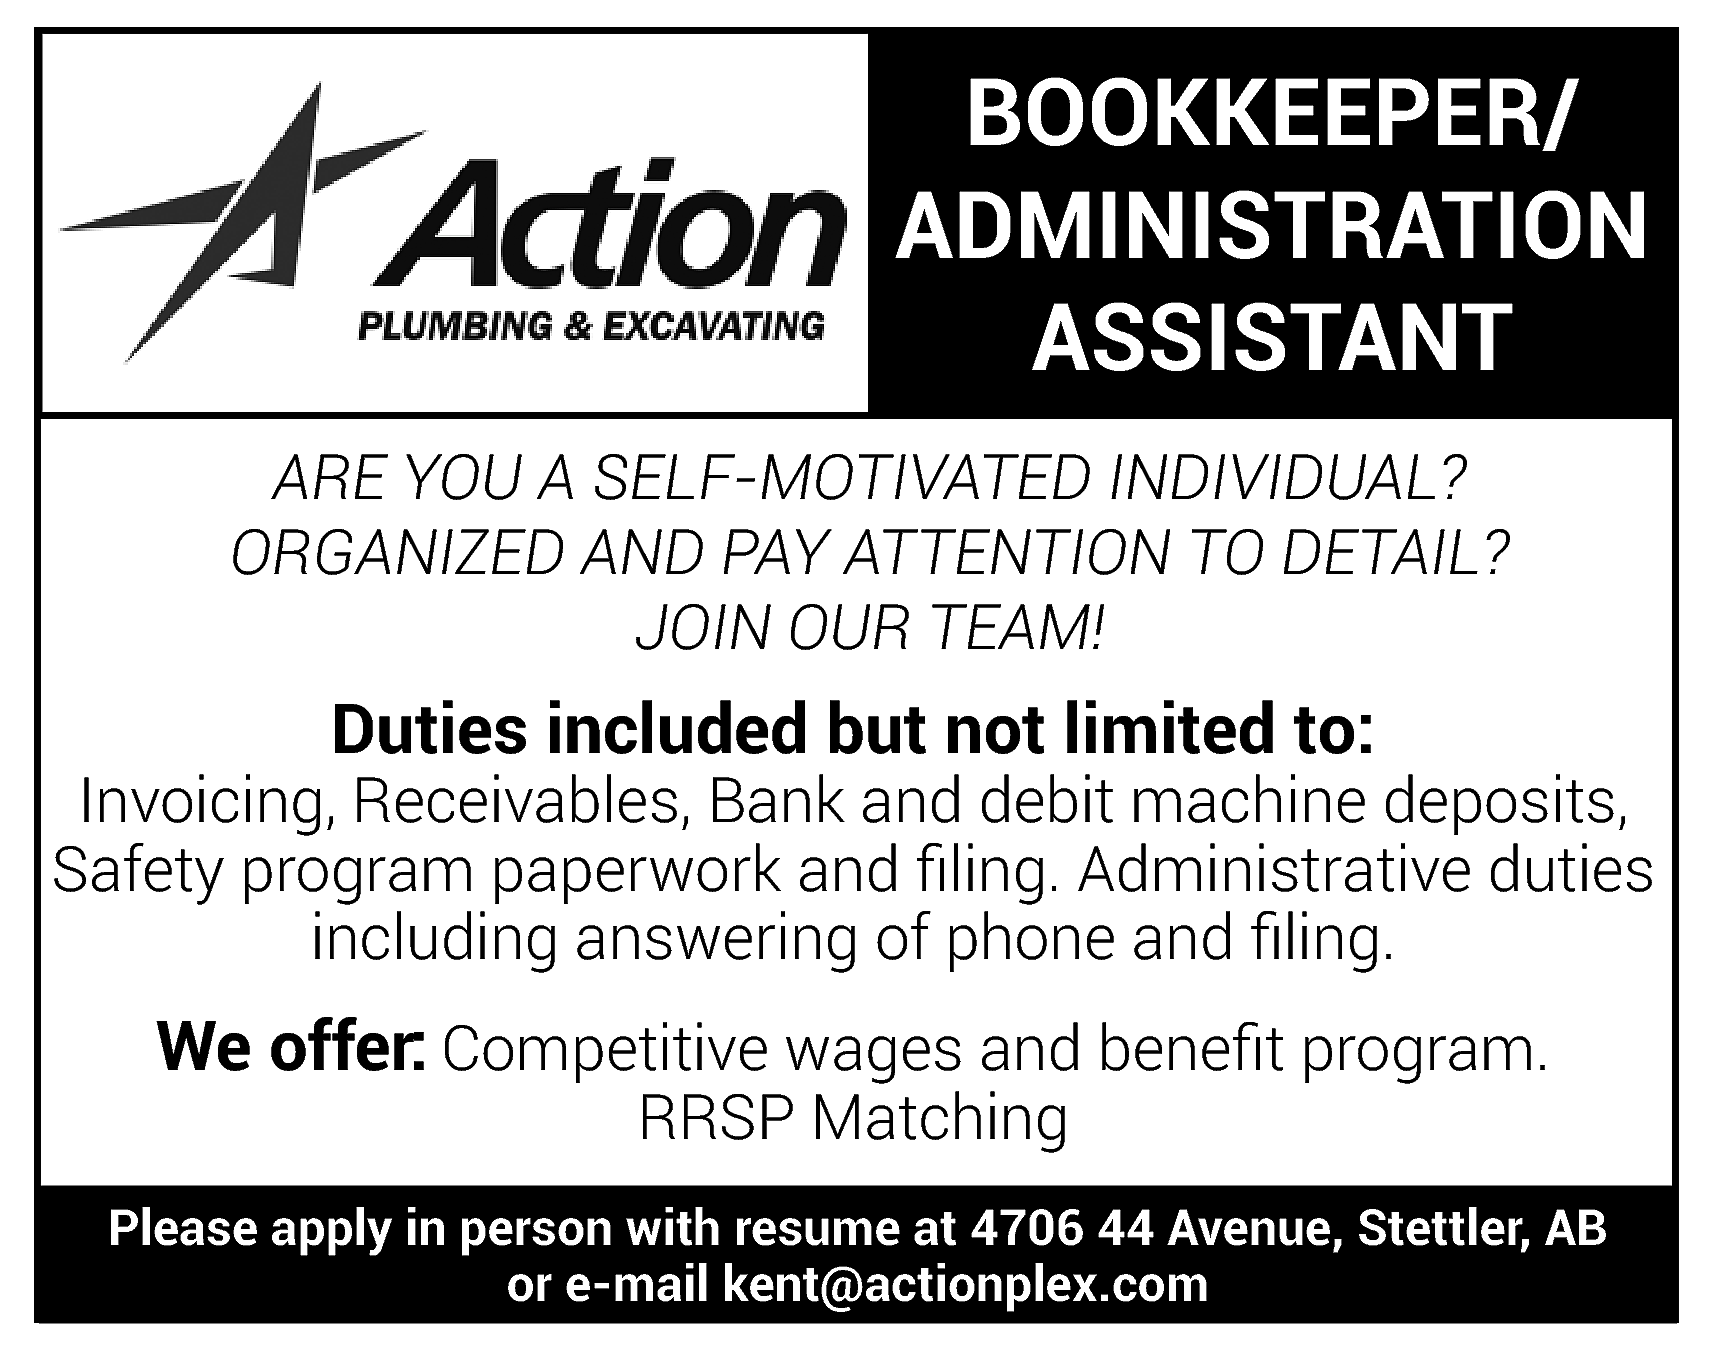 BOOKKEEPER/ <br>ADMINISTRATION <br>ASSISTANT <br>ARE YOU  BOOKKEEPER/  ADMINISTRATION  ASSISTANT  ARE YOU A SELF-MOTIVATED INDIVIDUAL?  ORGANIZED AND PAY ATTENTION TO DETAIL?  JOIN OUR TEAM!    Duties included but not limited to:    Invoicing, Receivables, Bank and debit machine deposits,  Safety program paperwork and filing. Administrative duties  including answering of phone and filing.    We offer: Competitive wages and benefit program.  RRSP Matching    Please apply in person with resume at 4706 44 Avenue, Stettler, AB  or e-mail kent@actionplex.com    